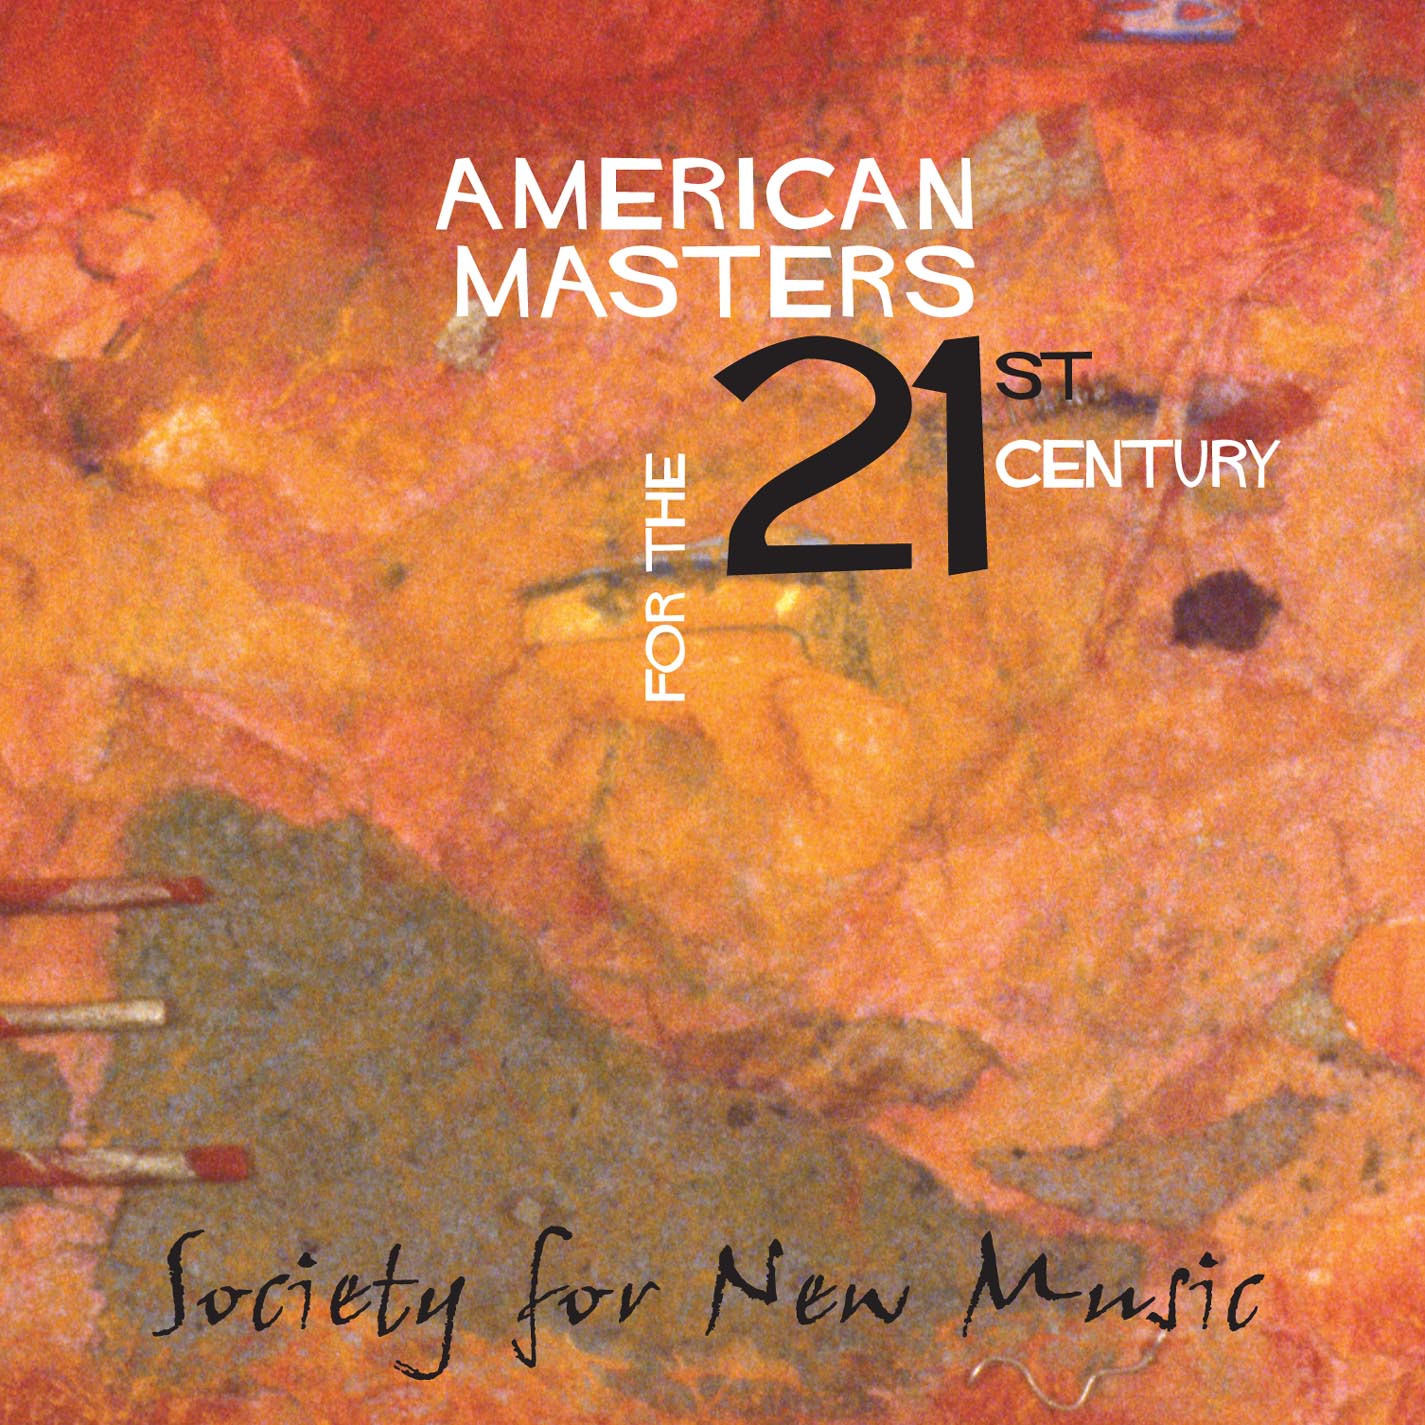 AMERICAN MASTERS FOR THE 21ST